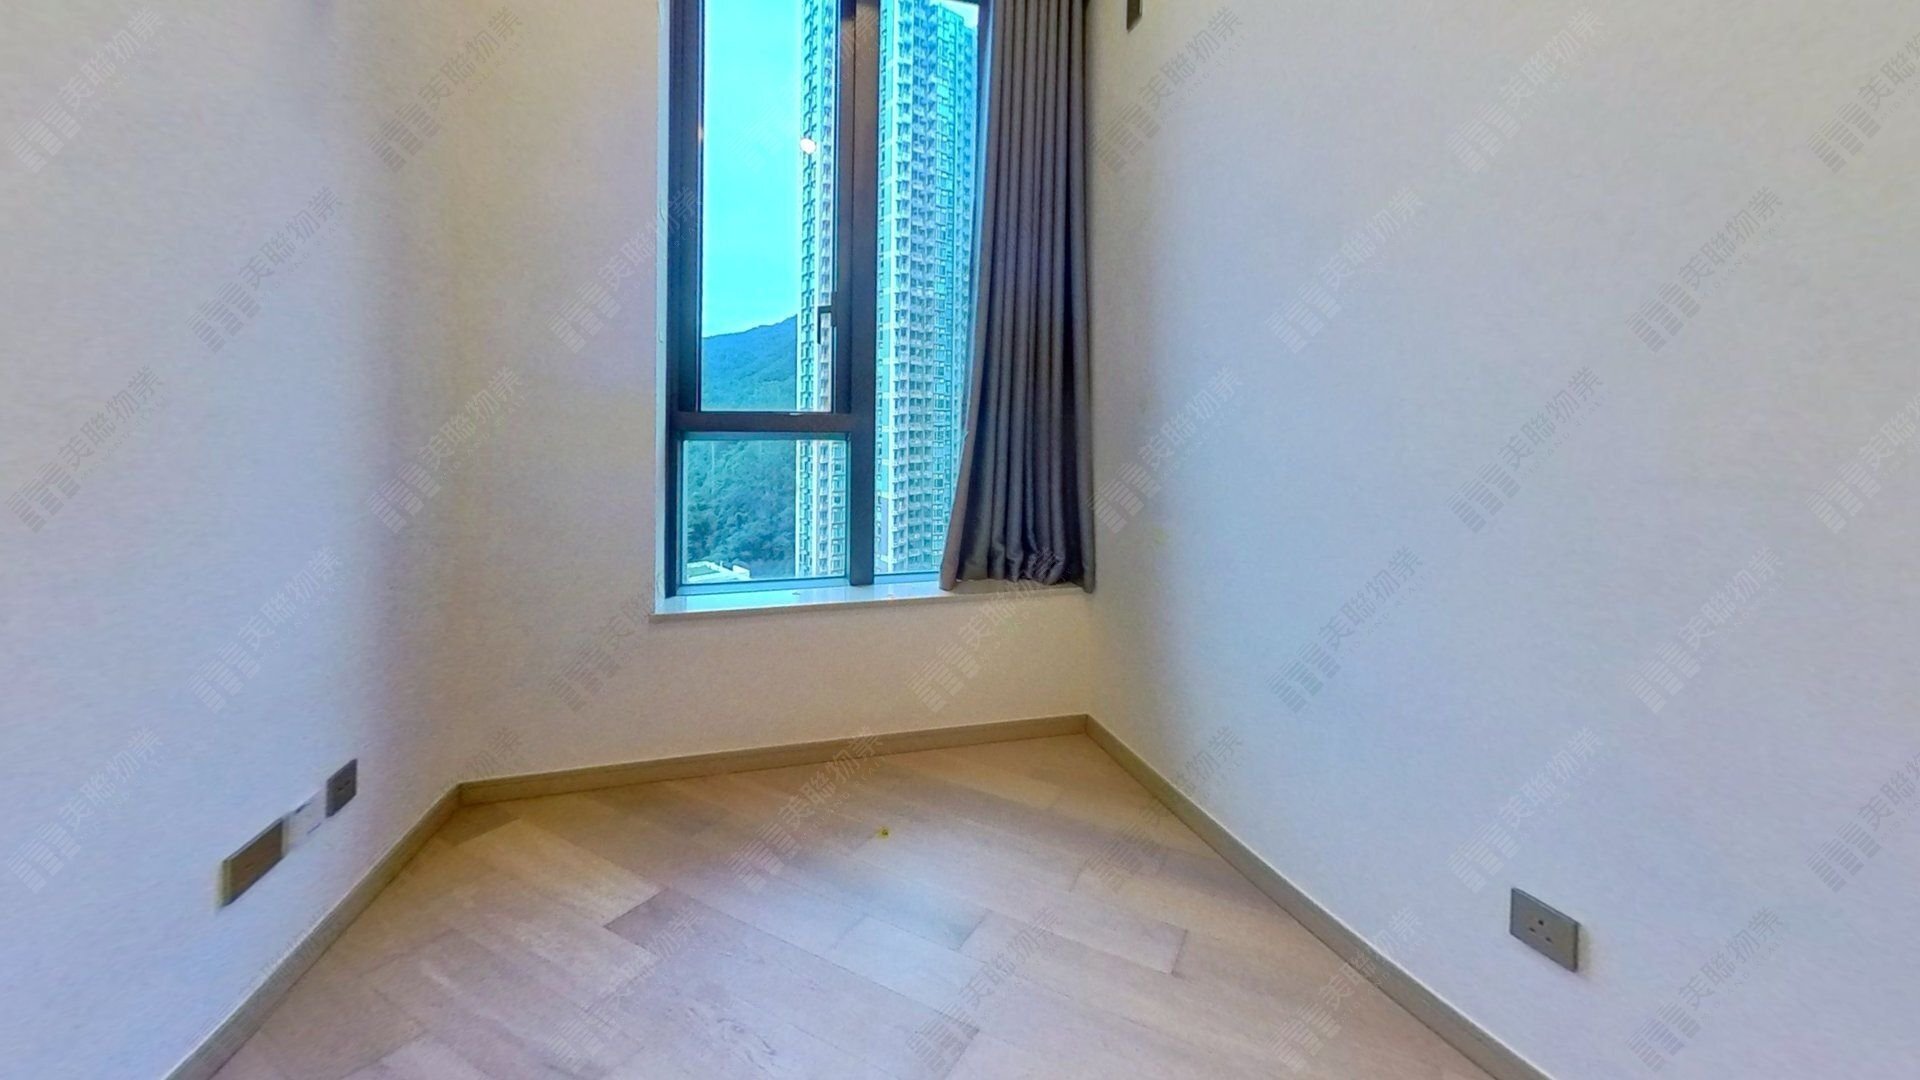 MANOR HILL TWR 02 Tseung Kwan O M 1515900 For Buy